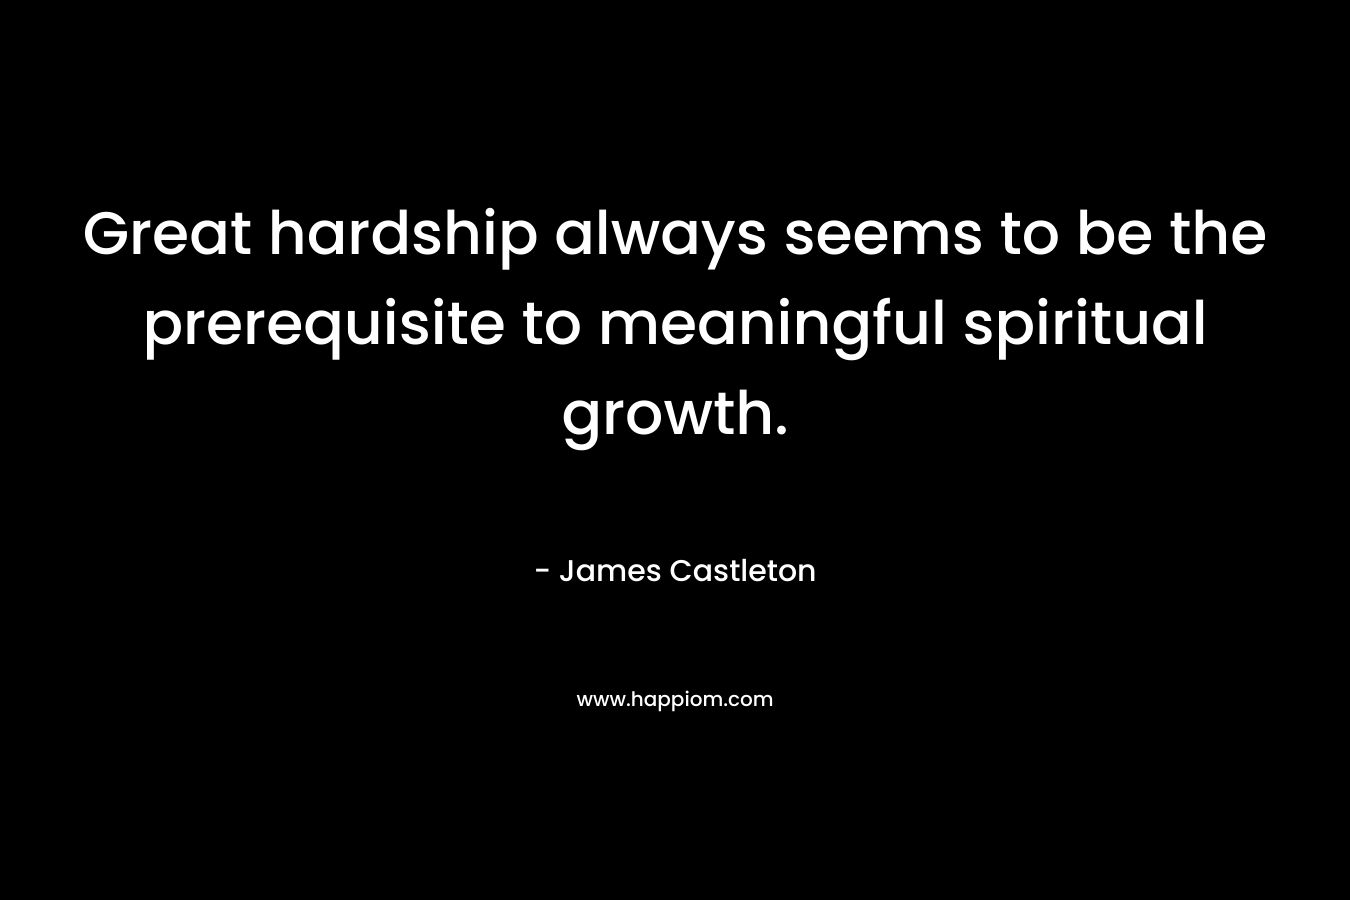 Great hardship always seems to be the prerequisite to meaningful spiritual growth.